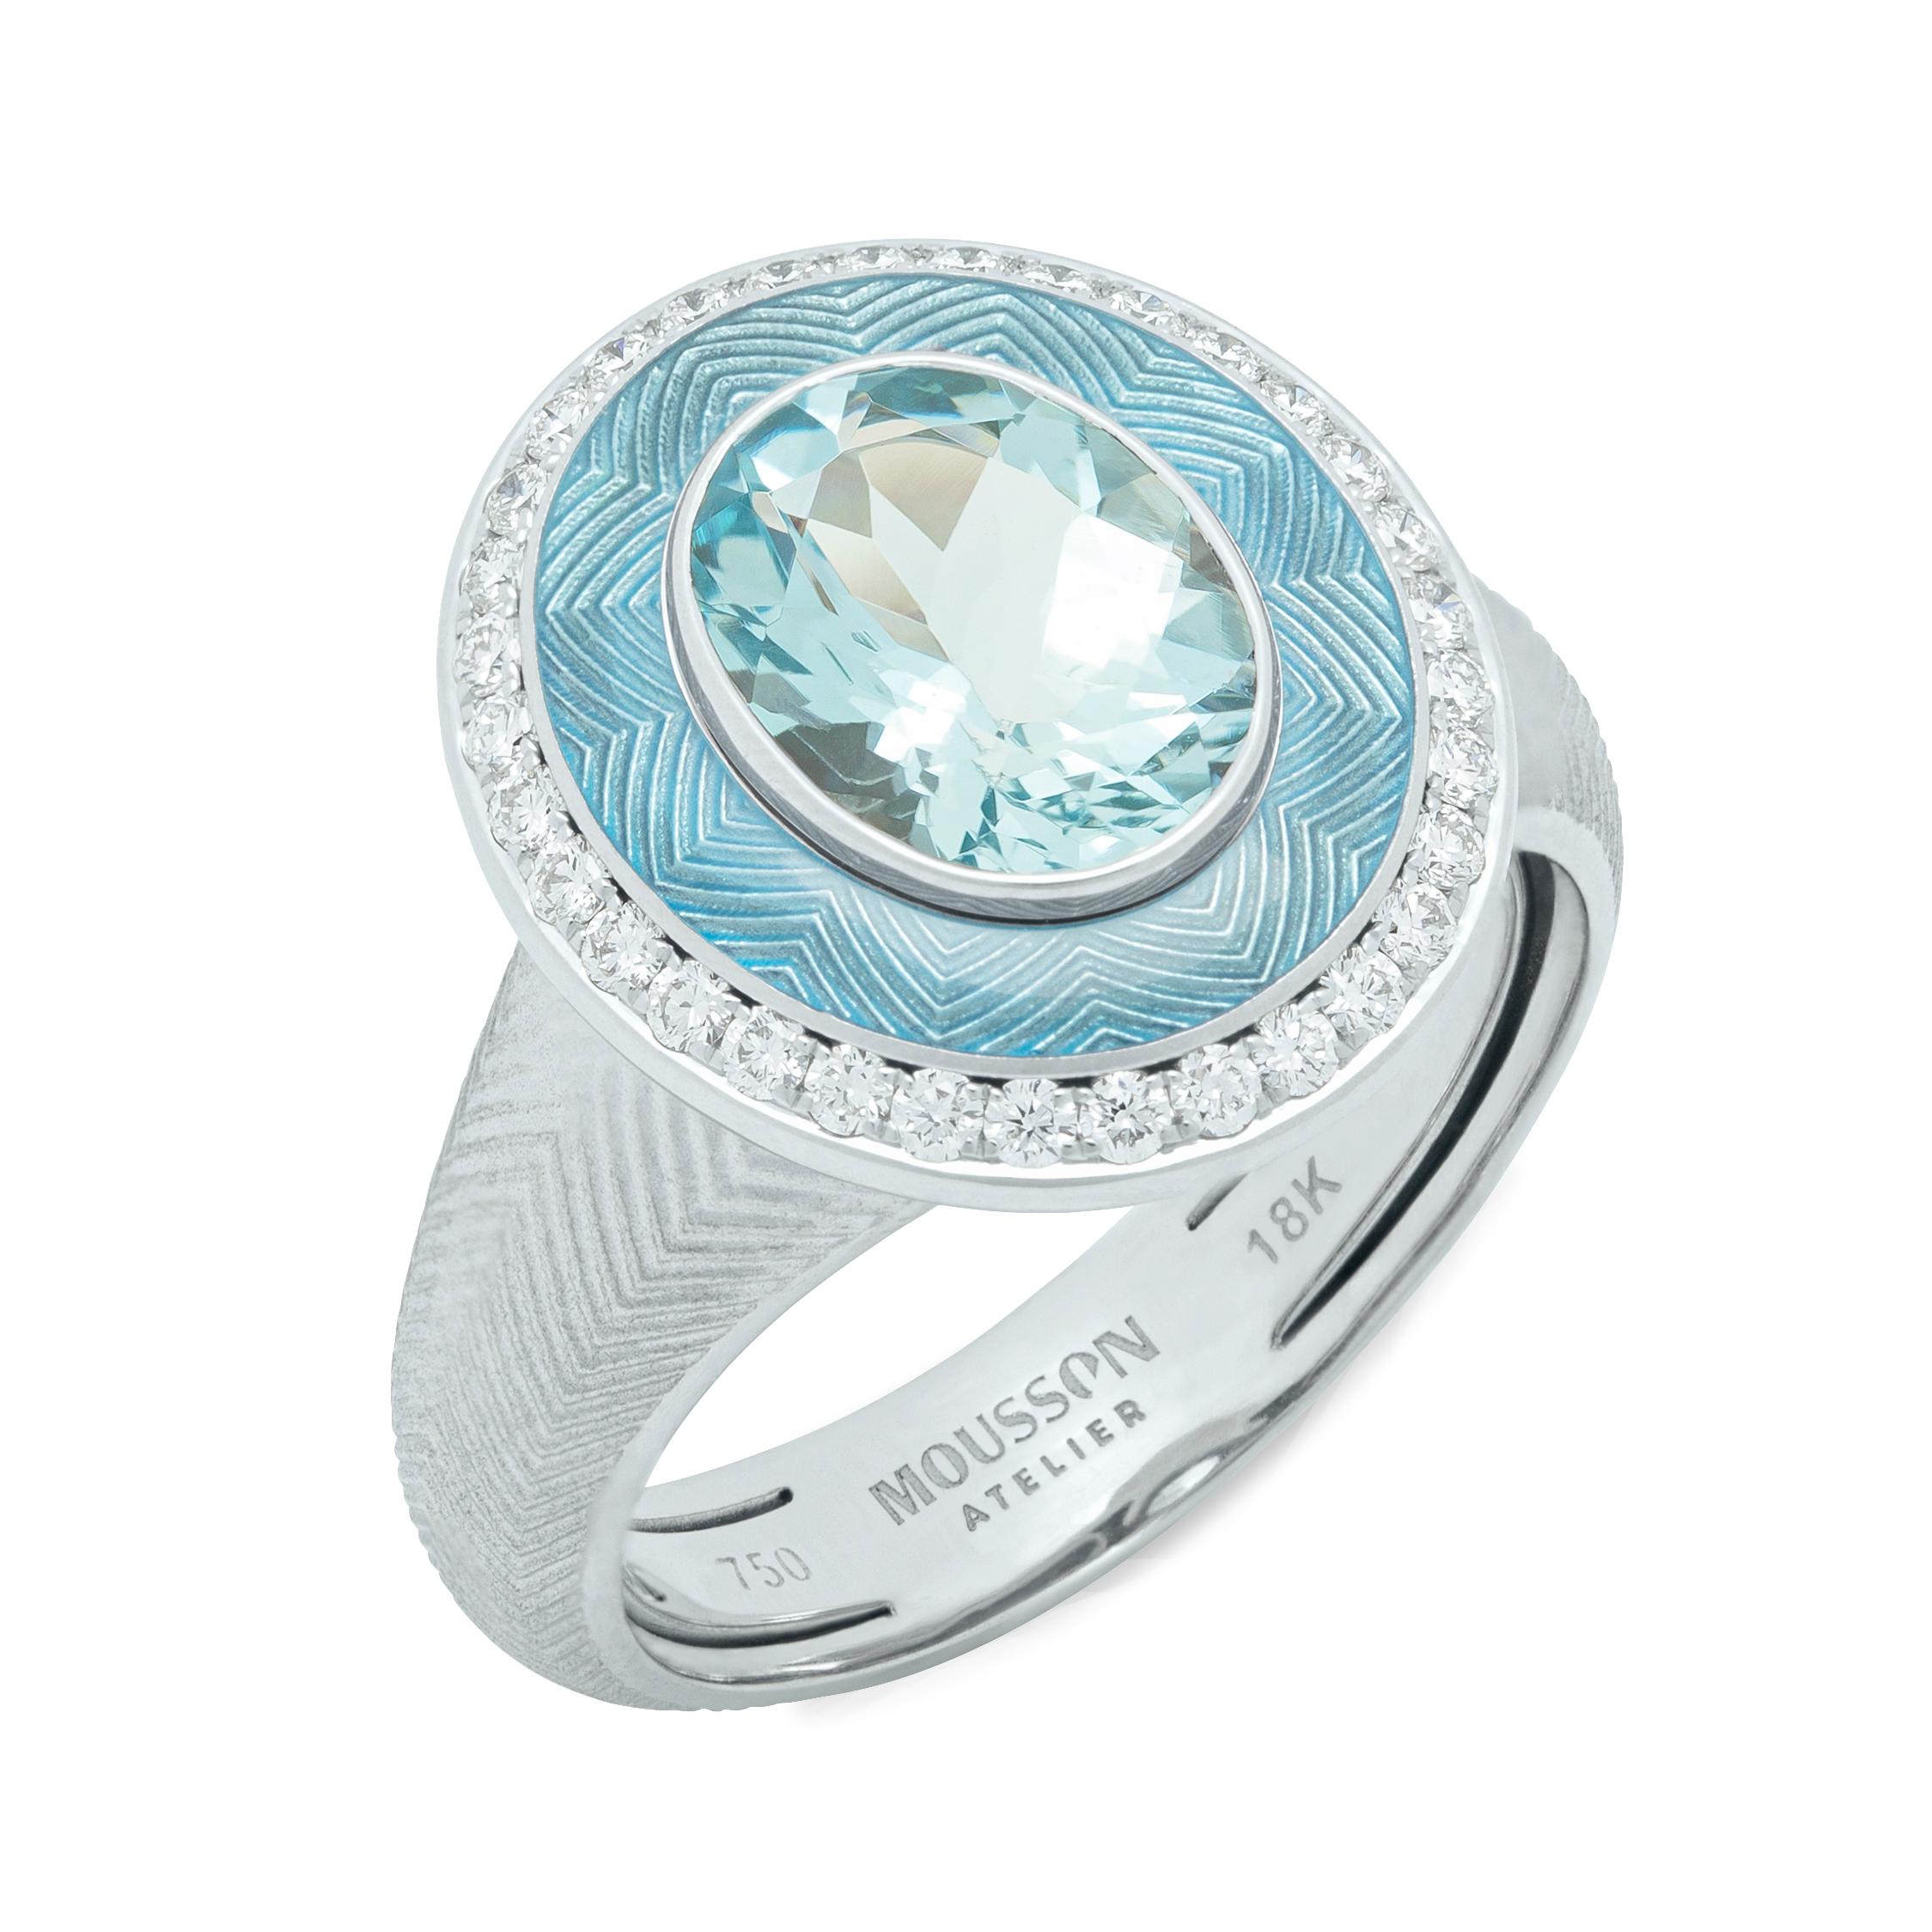 Aquamarine 1.66 Carat Diamonds 18 Karat White Gold Tweed Ring
Perhaps this is the brightest and most popular representative of the Pret-a-Porter collection. The texture of Tweed reminds of the well-known fabric, but most importantly, it reminds of